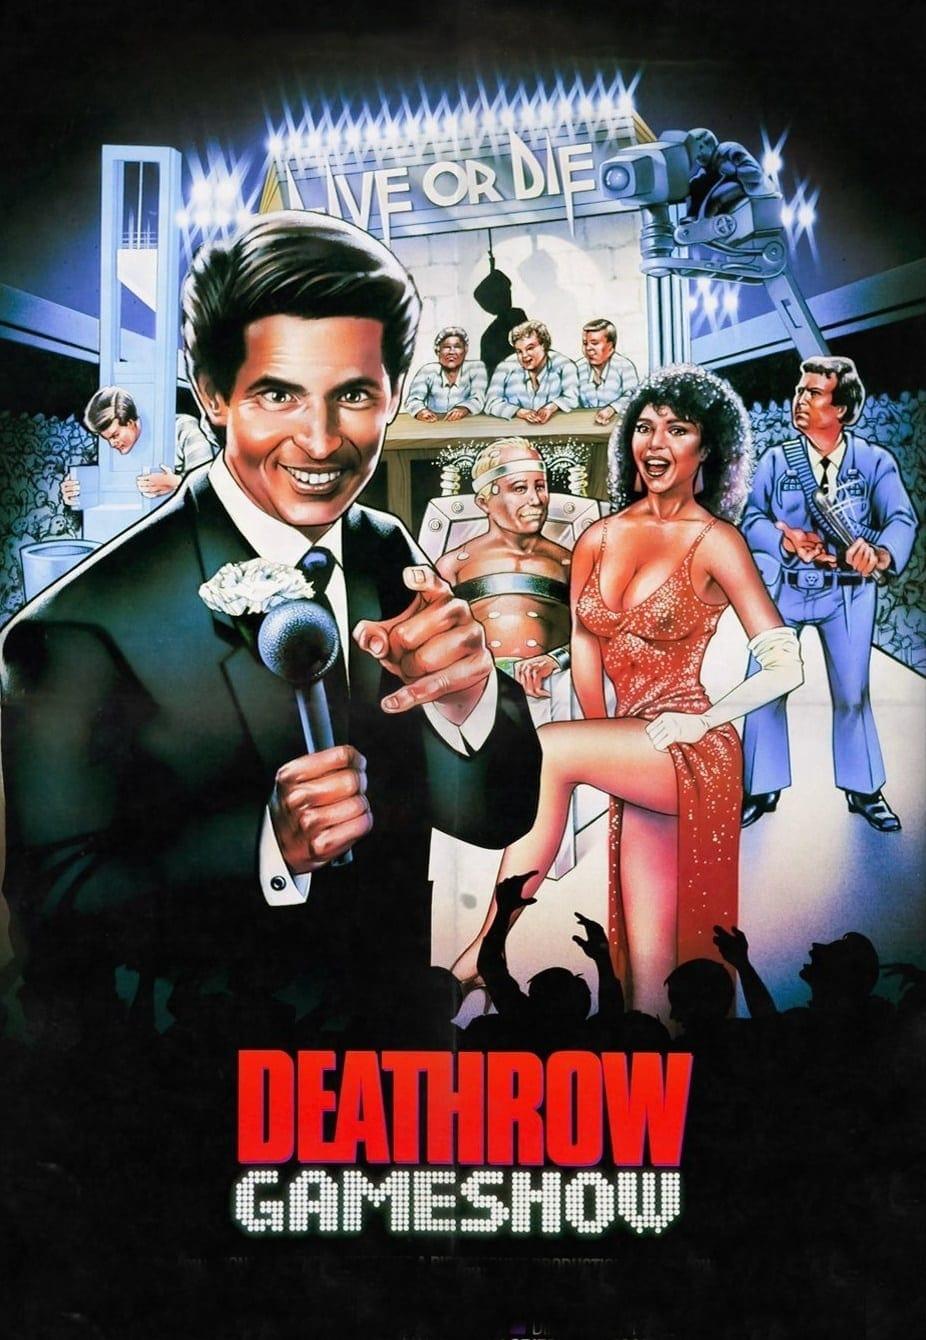 Deathrow Gameshow poster